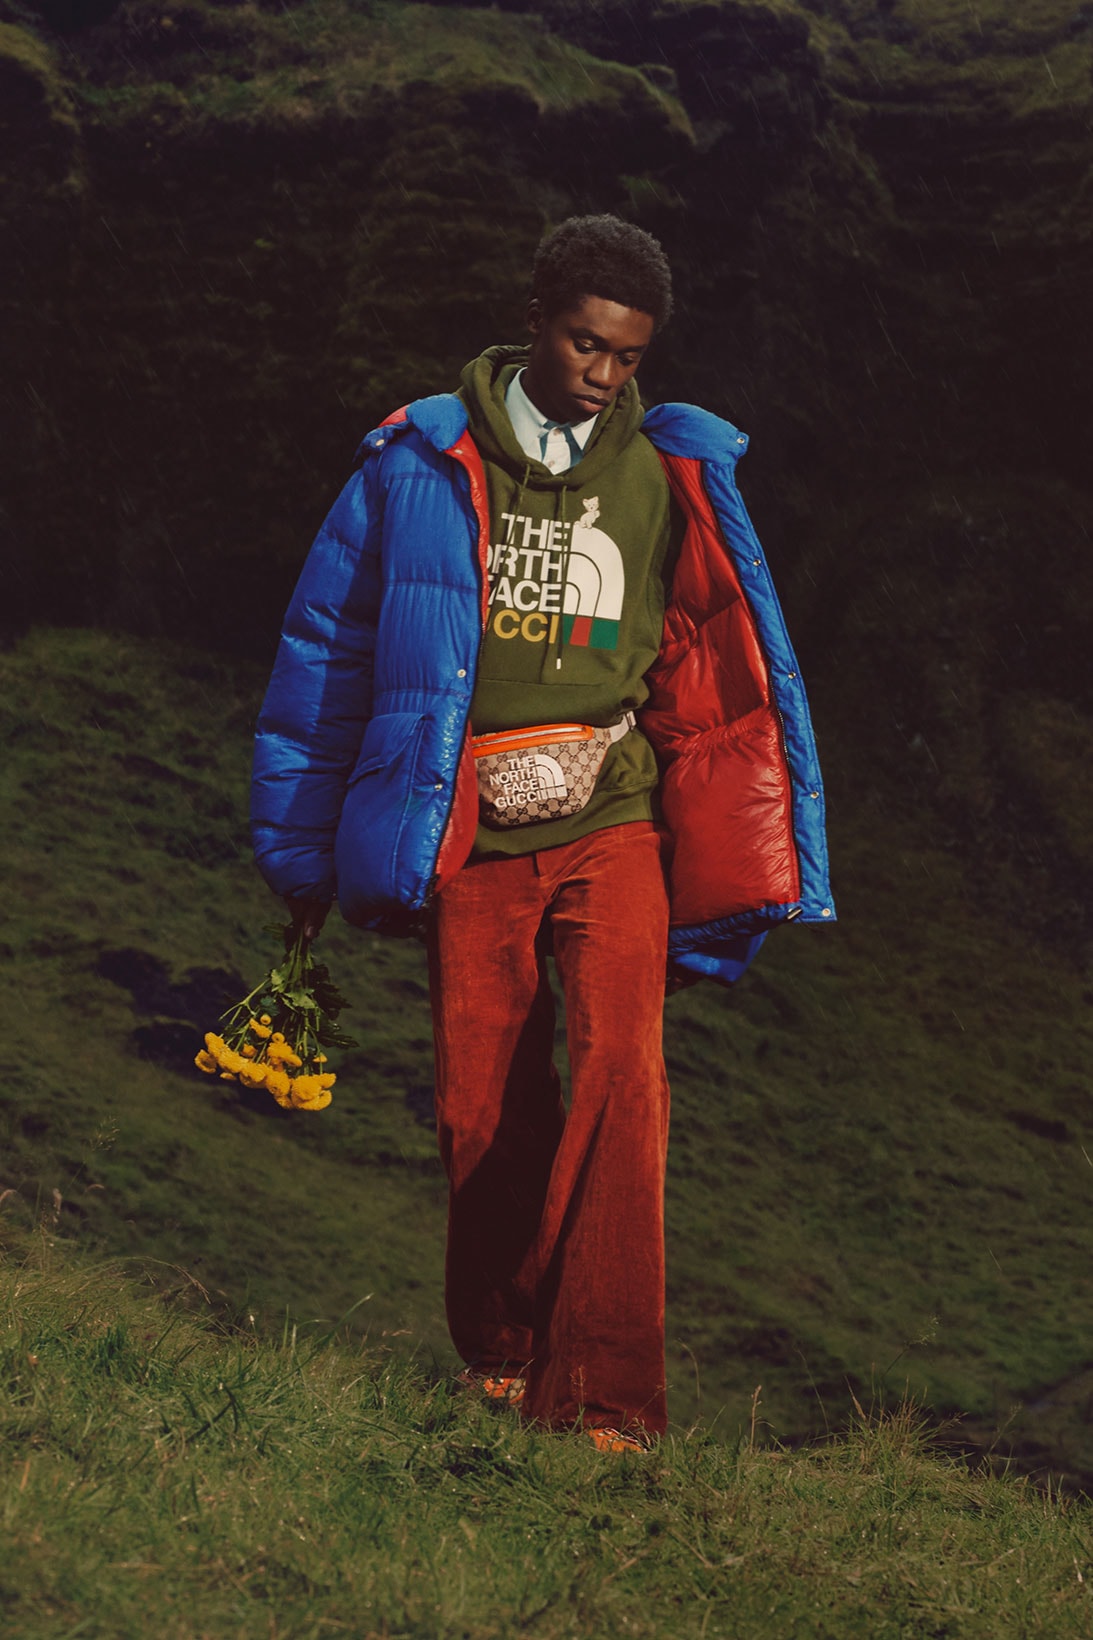 The North Face Gucci Chapter 2 Collection Collaboration Campaign